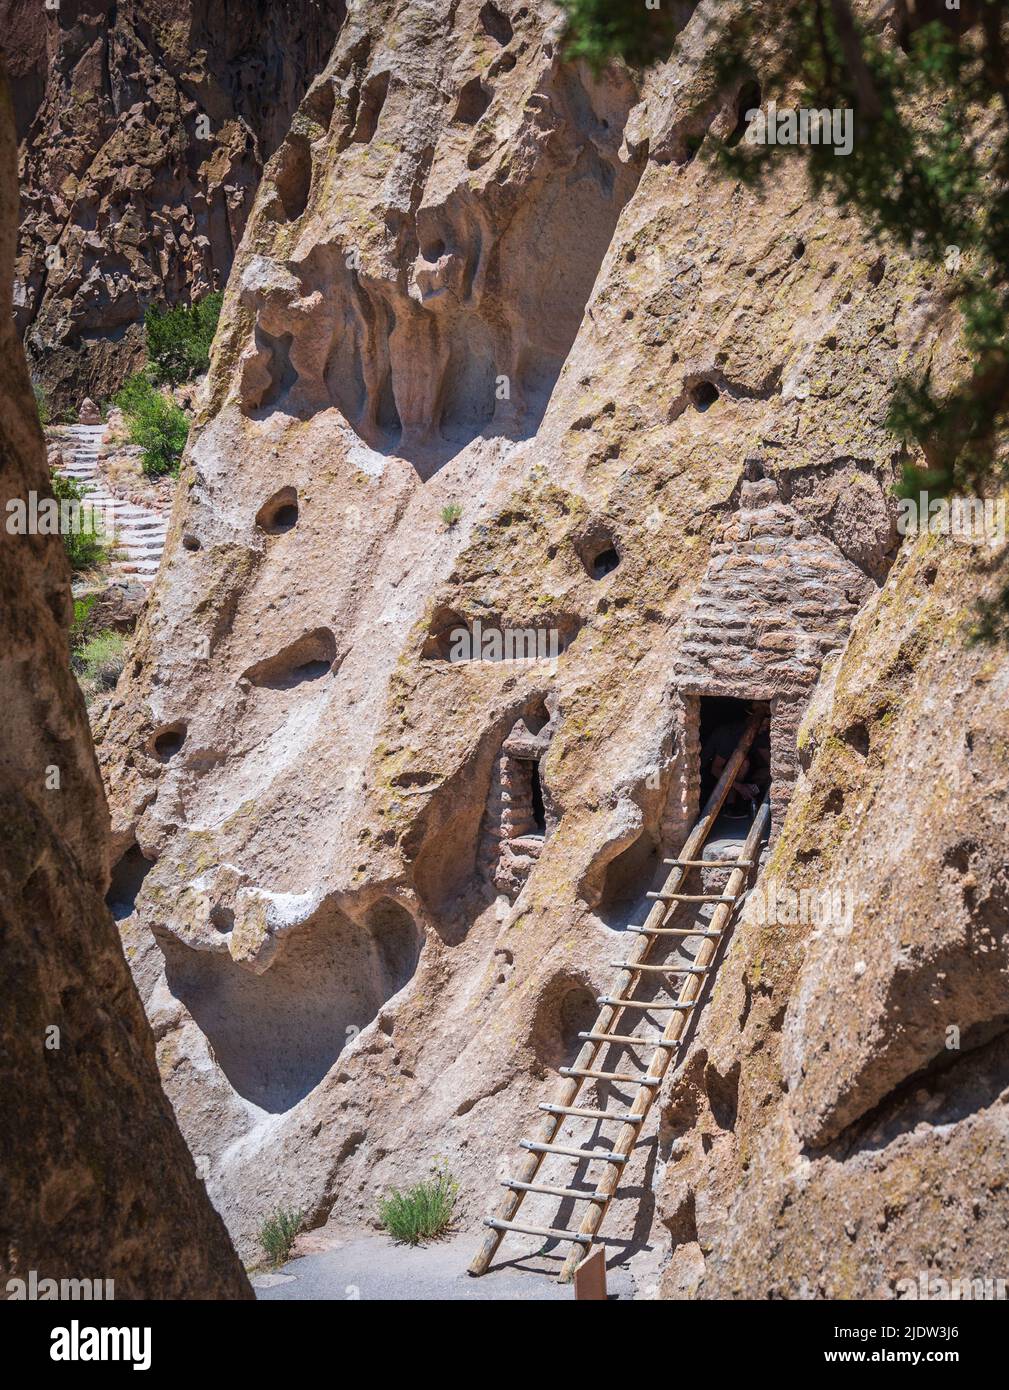 Bandelier National Monument, on the Pueblo Loop Trail visitors may access cavates that have ladders, New Mexico, USA. Stock Photo